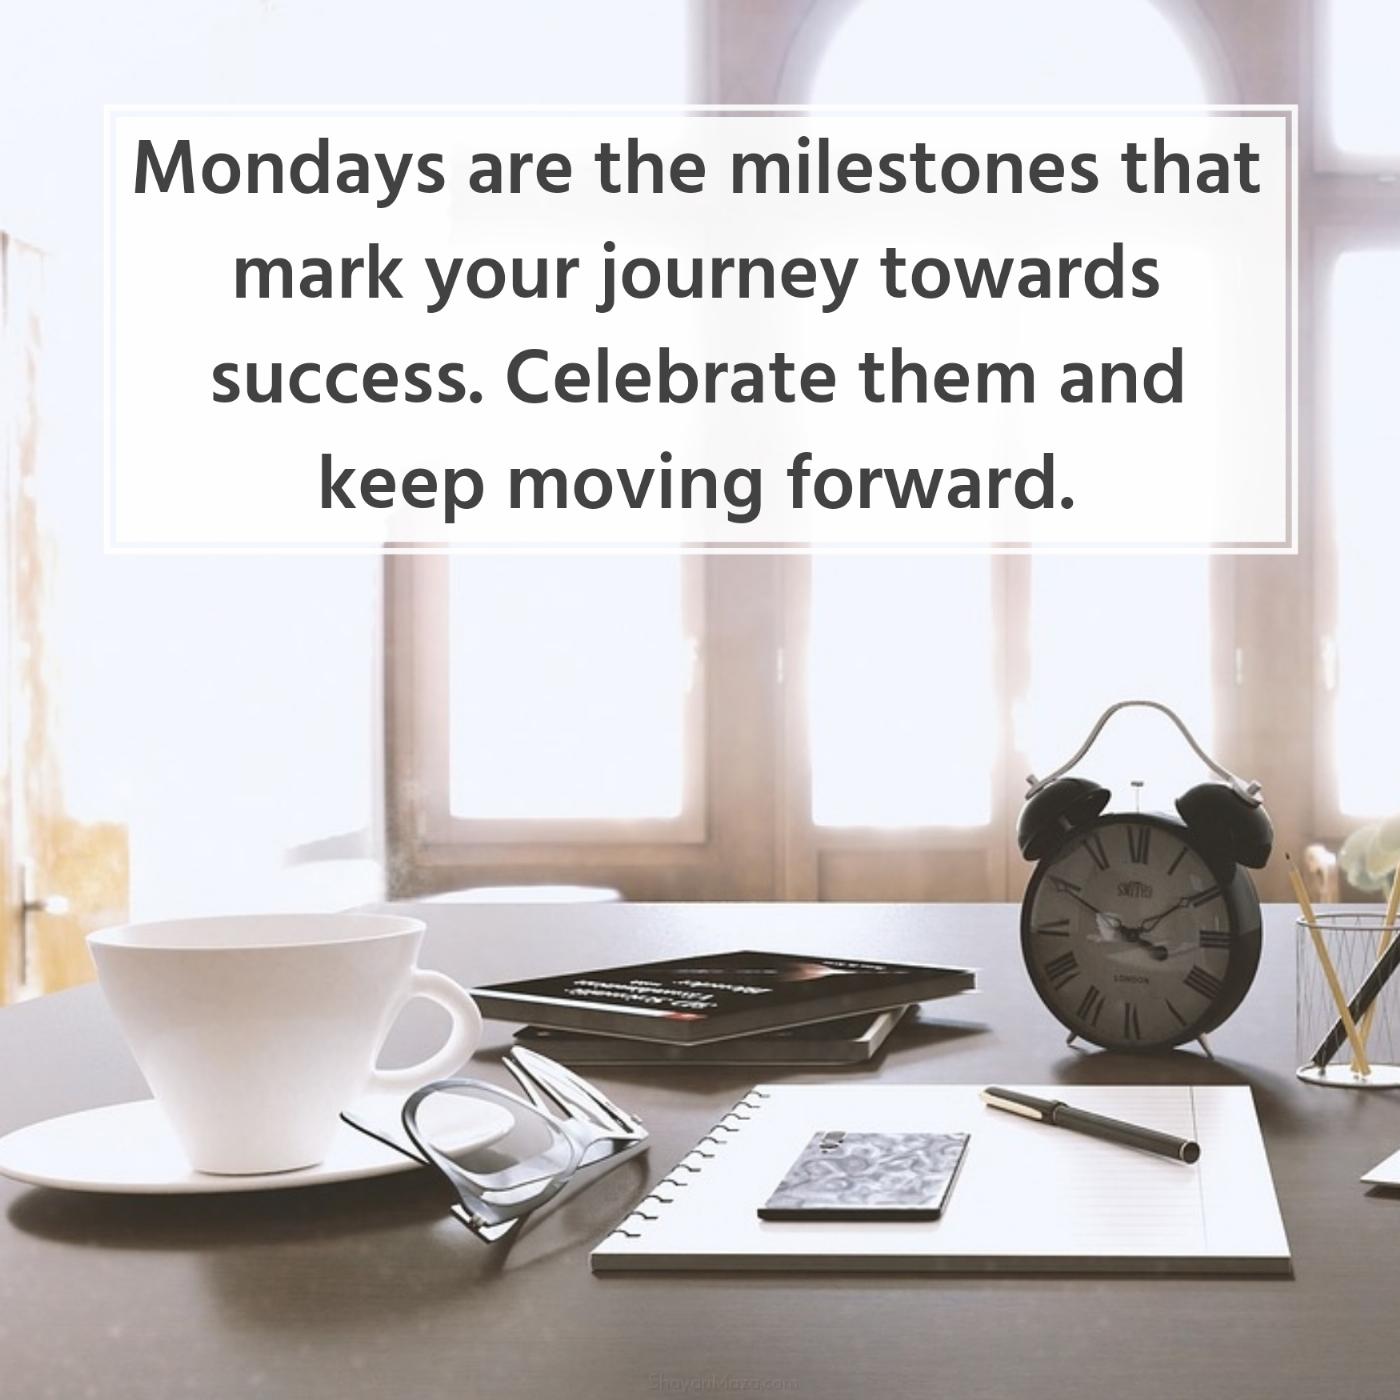 Mondays are the milestones that mark your journey towards success